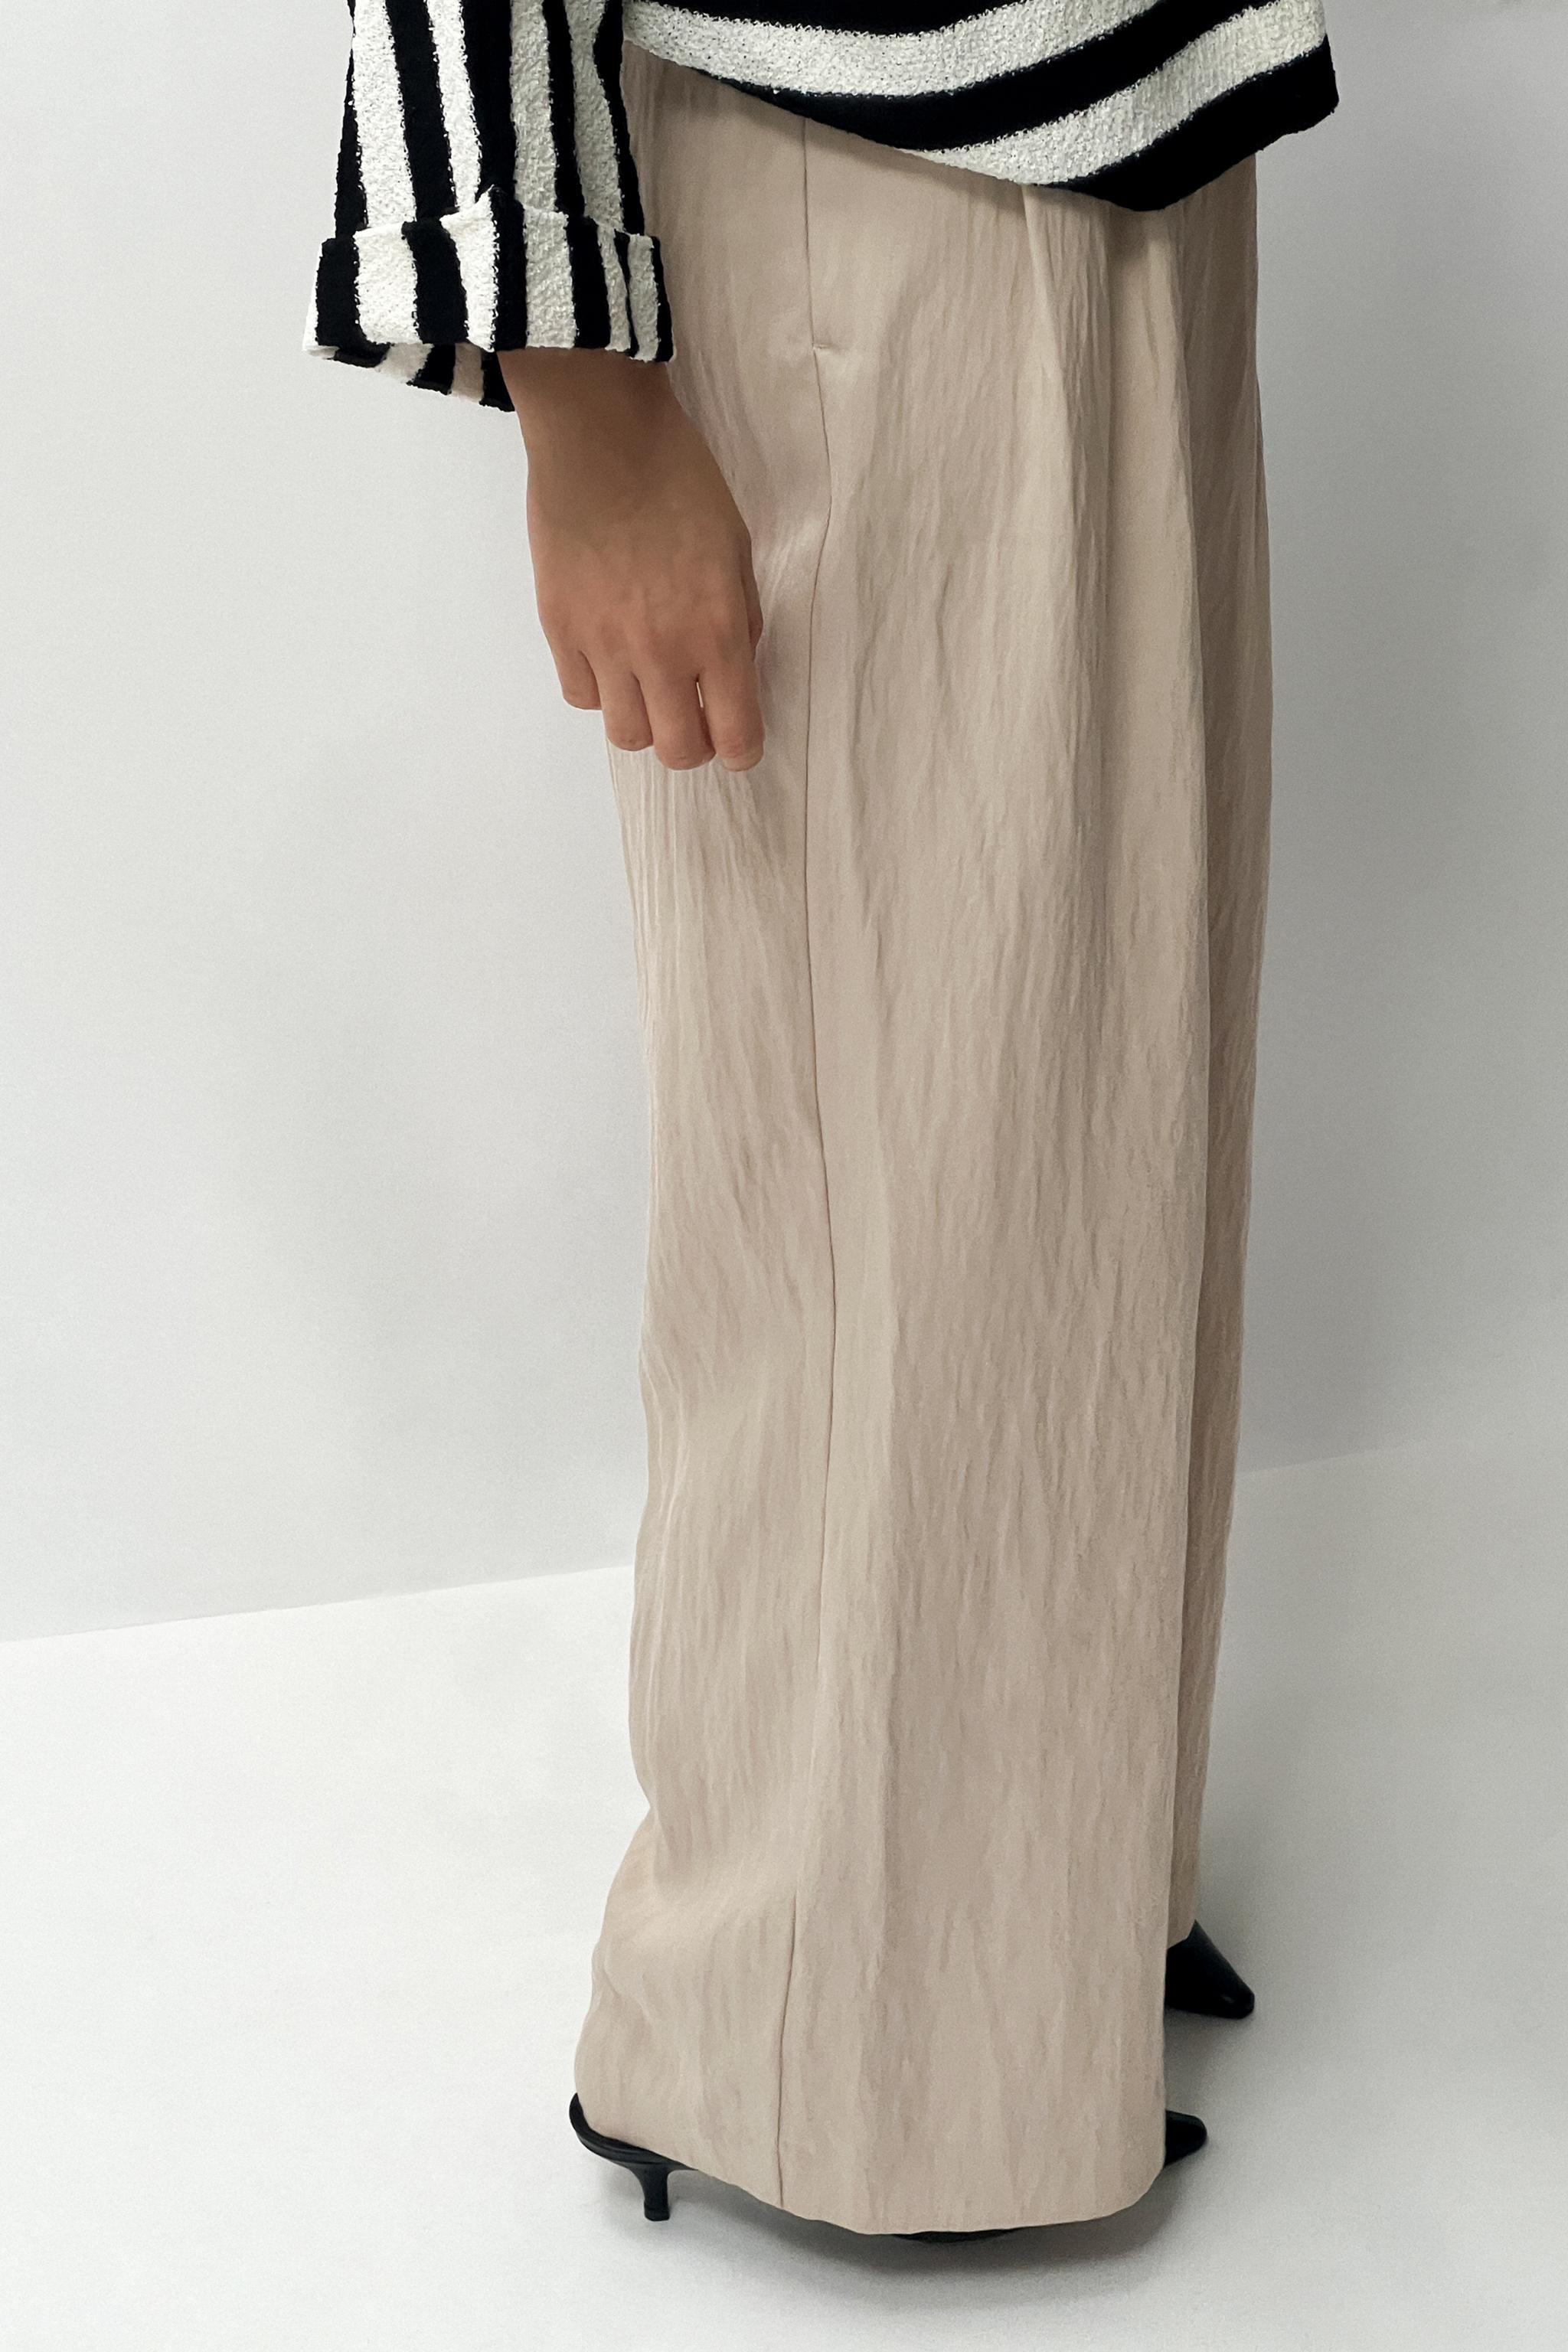 ZARA Embroidered Linen High Waist Straight Pants Trousers S-L NWT 2731/046